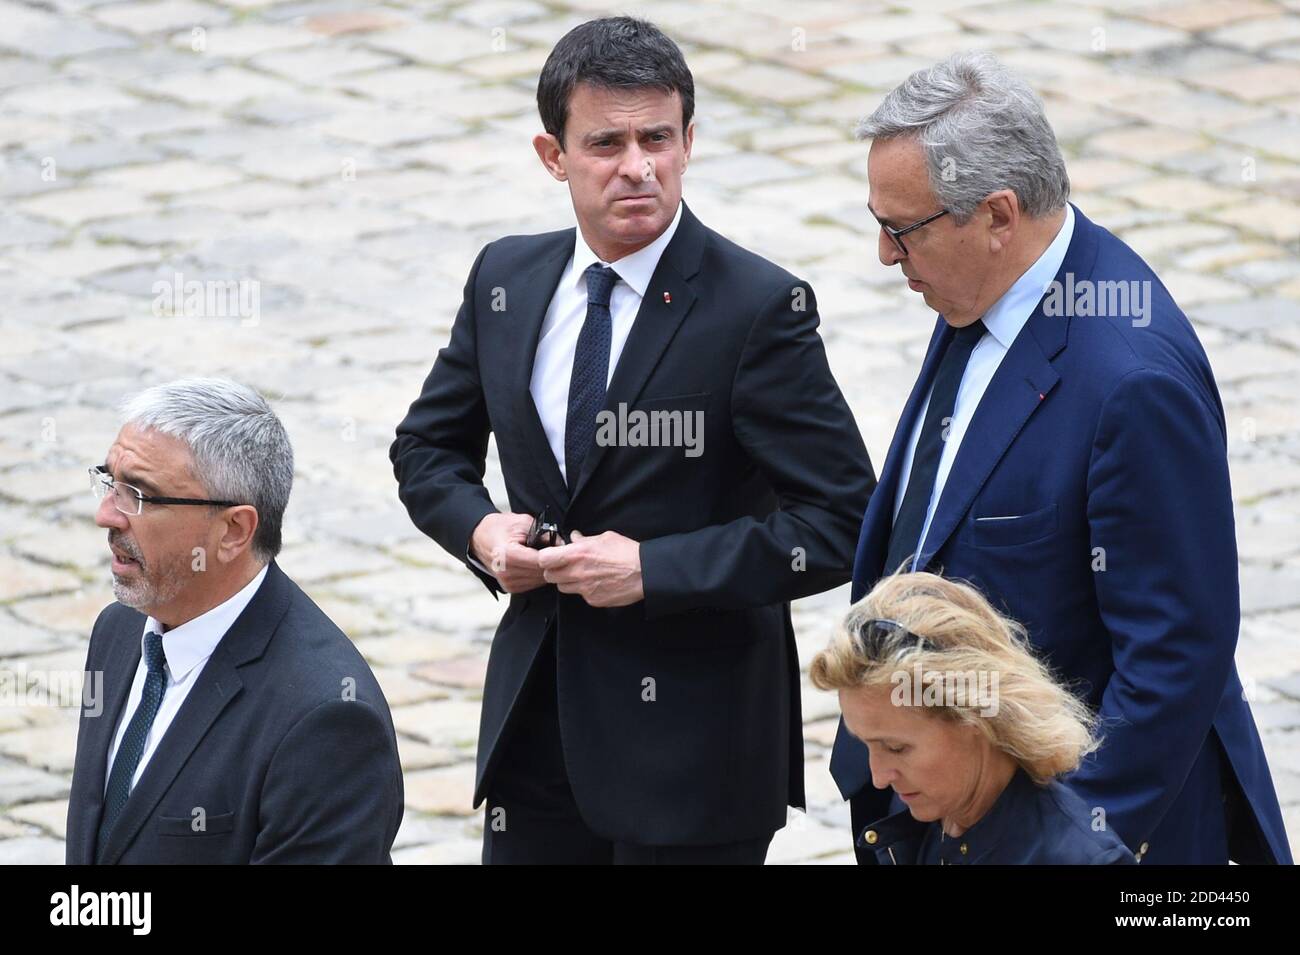 LVMH CEO Bernard Arnault and his son Frederic attending the funeral  ceremony for late French industrialist-turned-politician Serge Dassault,  the Hotel des Invalides courtyard on May 31, 2018 in Paris, France, who died